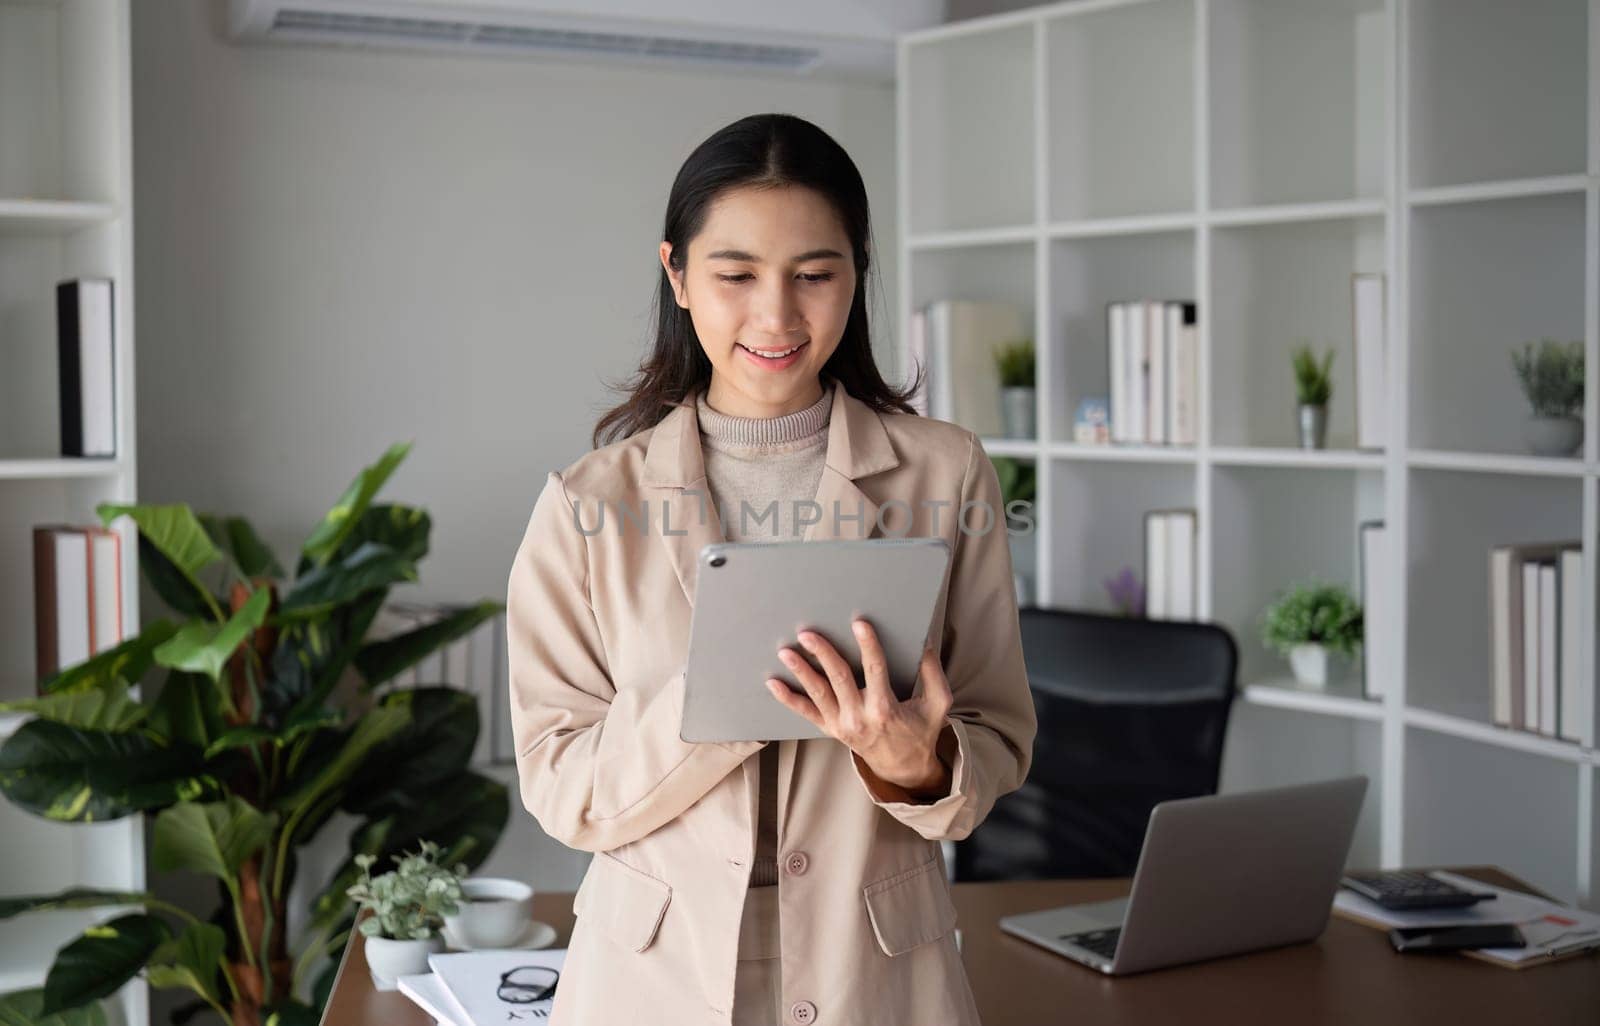 Asian businesswoman holding online business meeting via tablet in modern home office decorated with lush green plants..